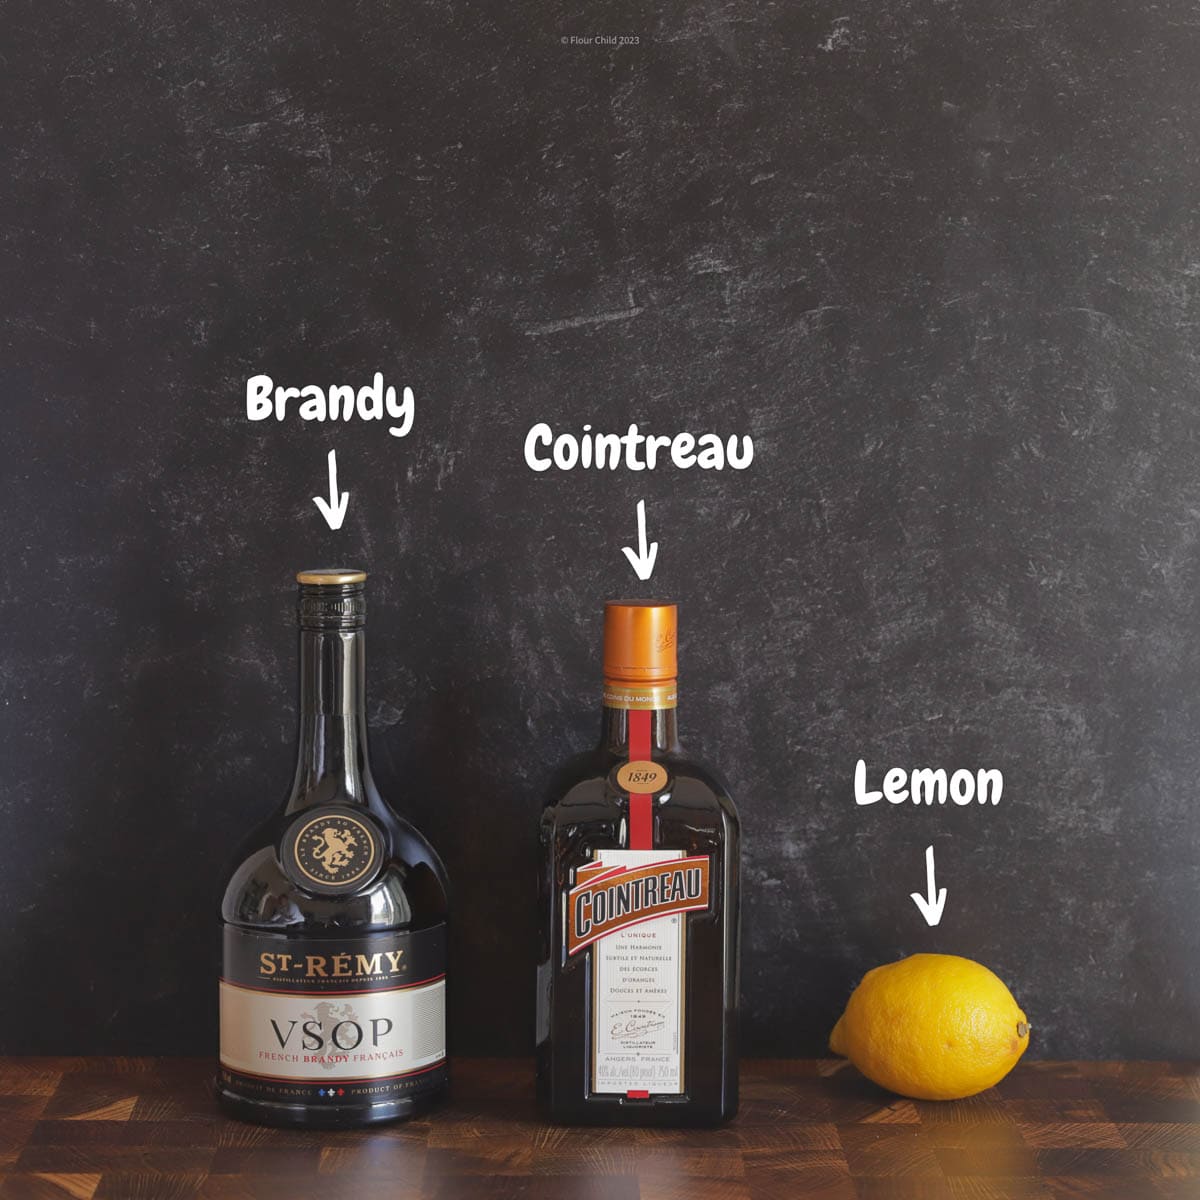 Ingredients for a sidecar cocktail include bottles of brandy, orange liqueur and an orange shown on a black background.